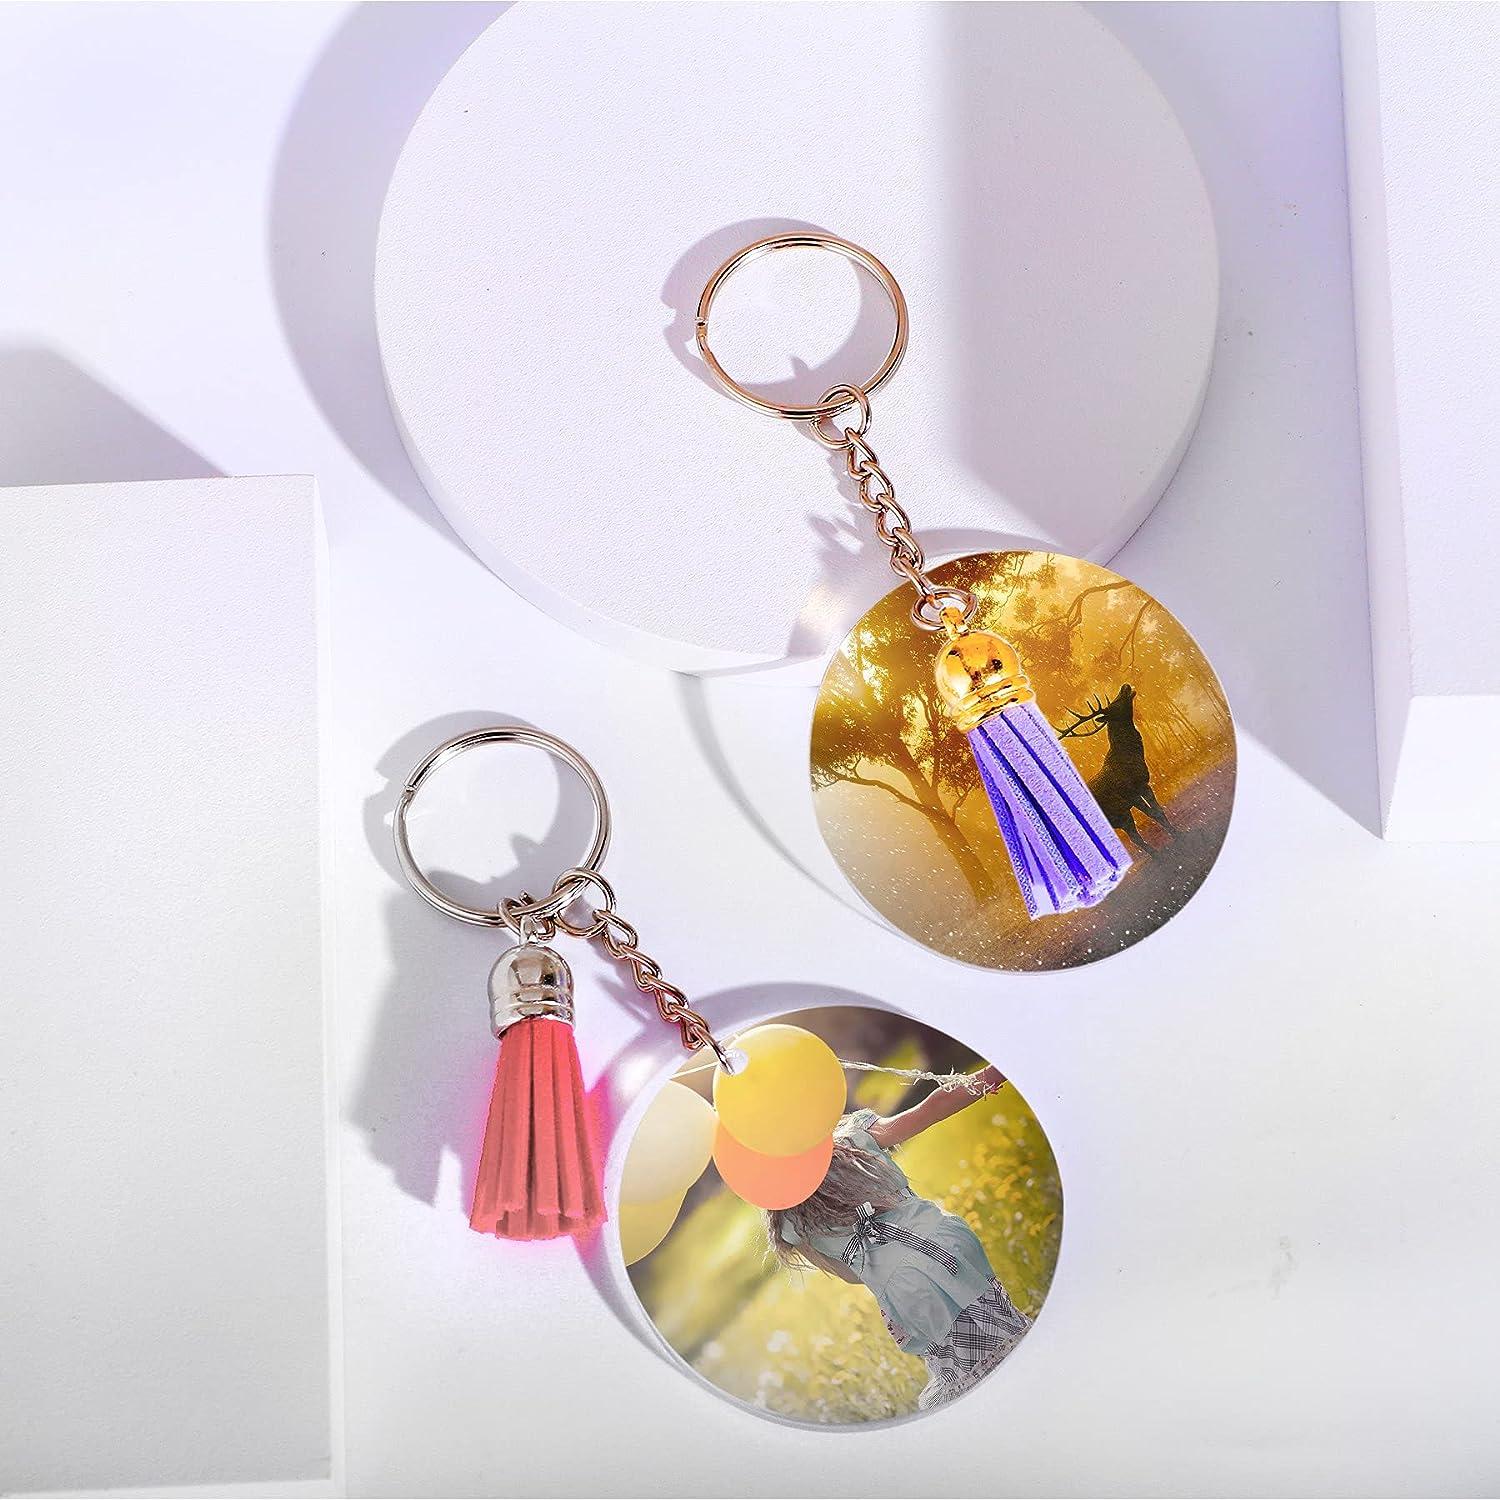 Set of blank round golden and silver keychains is hanging on the